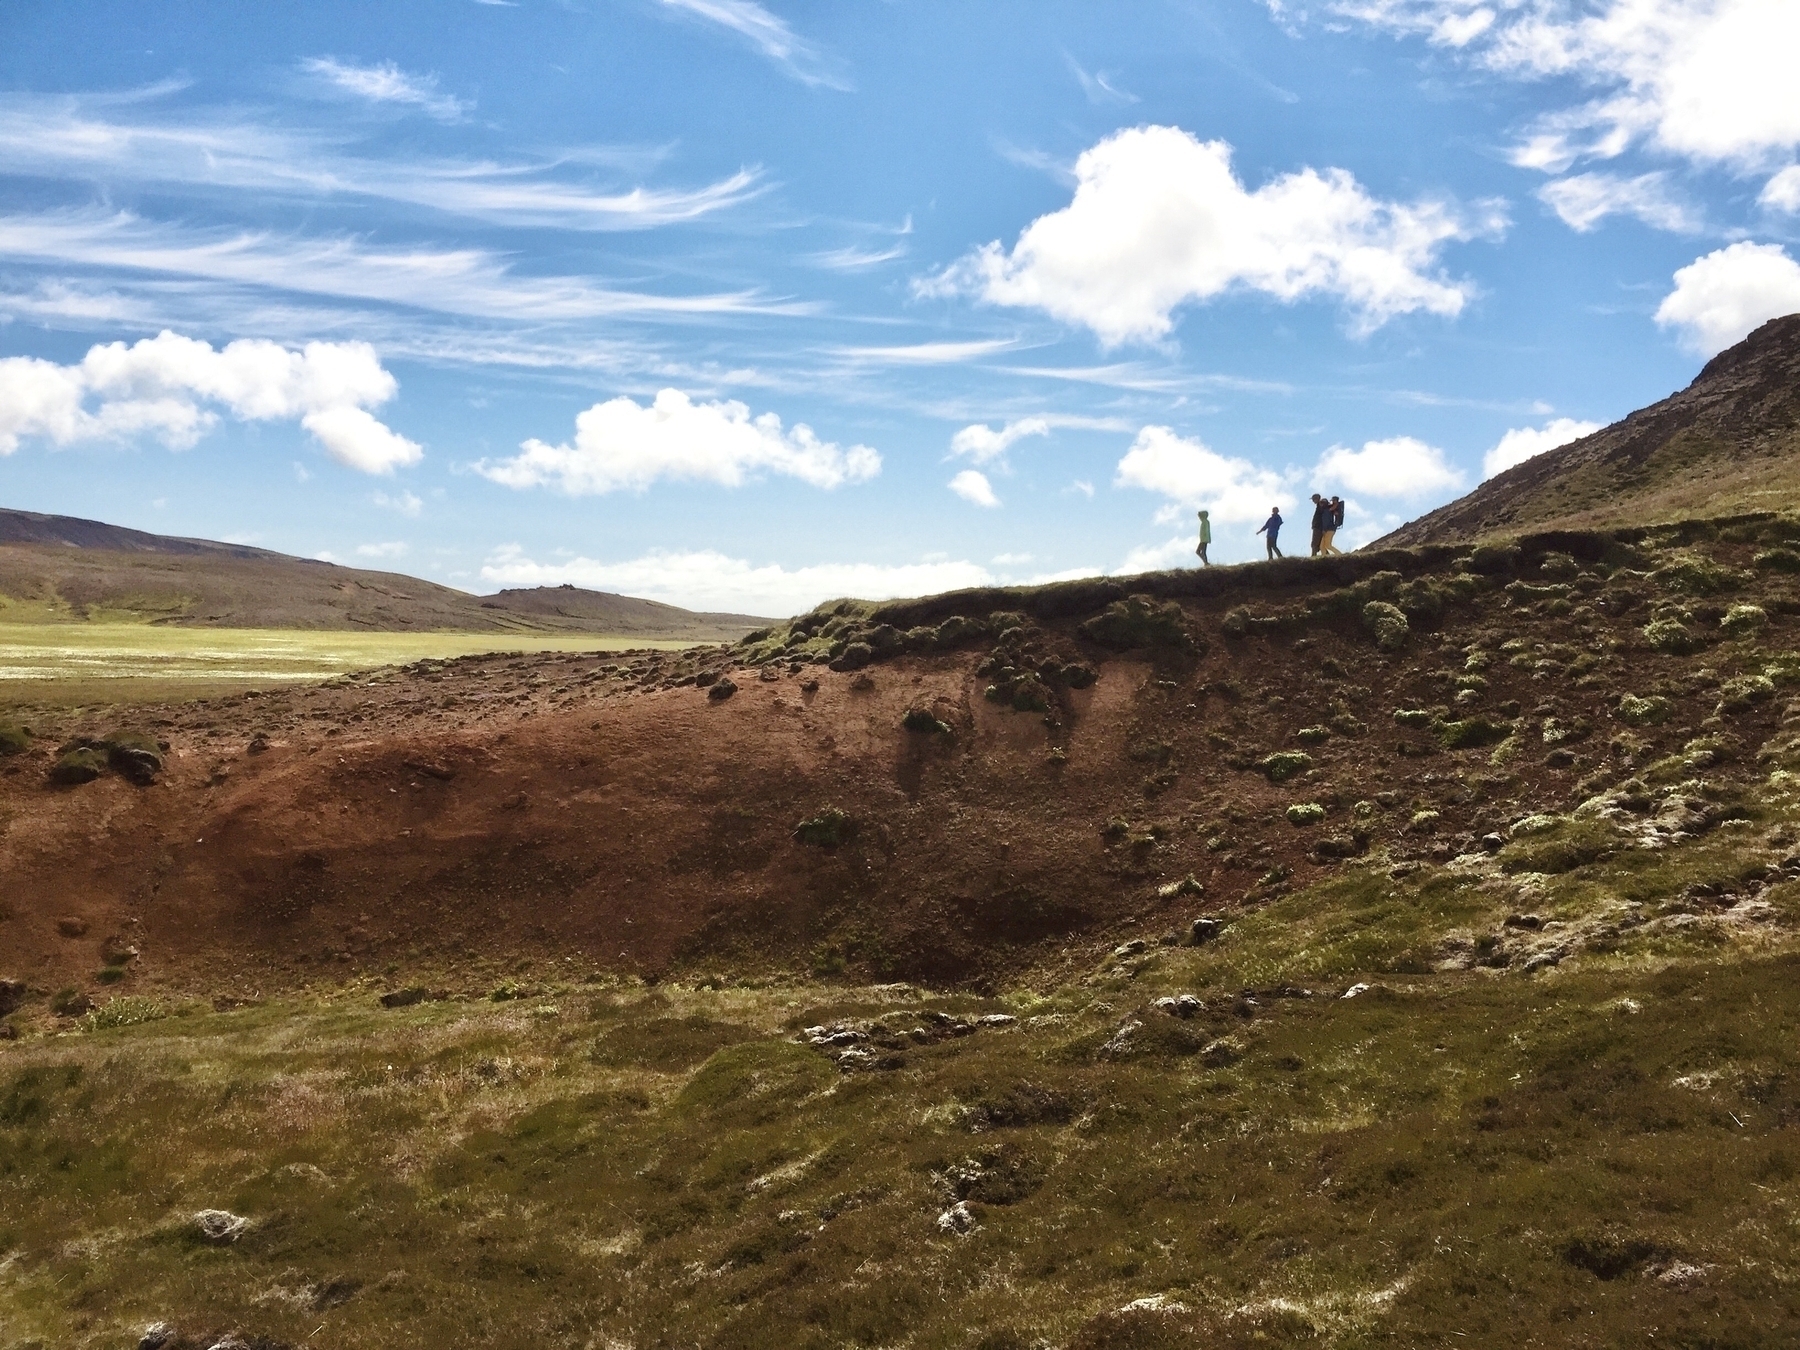 A photo taken several years ago in the geothermal are near the town of Grindavík. A group of tourists are walking along a ridge in the distance.